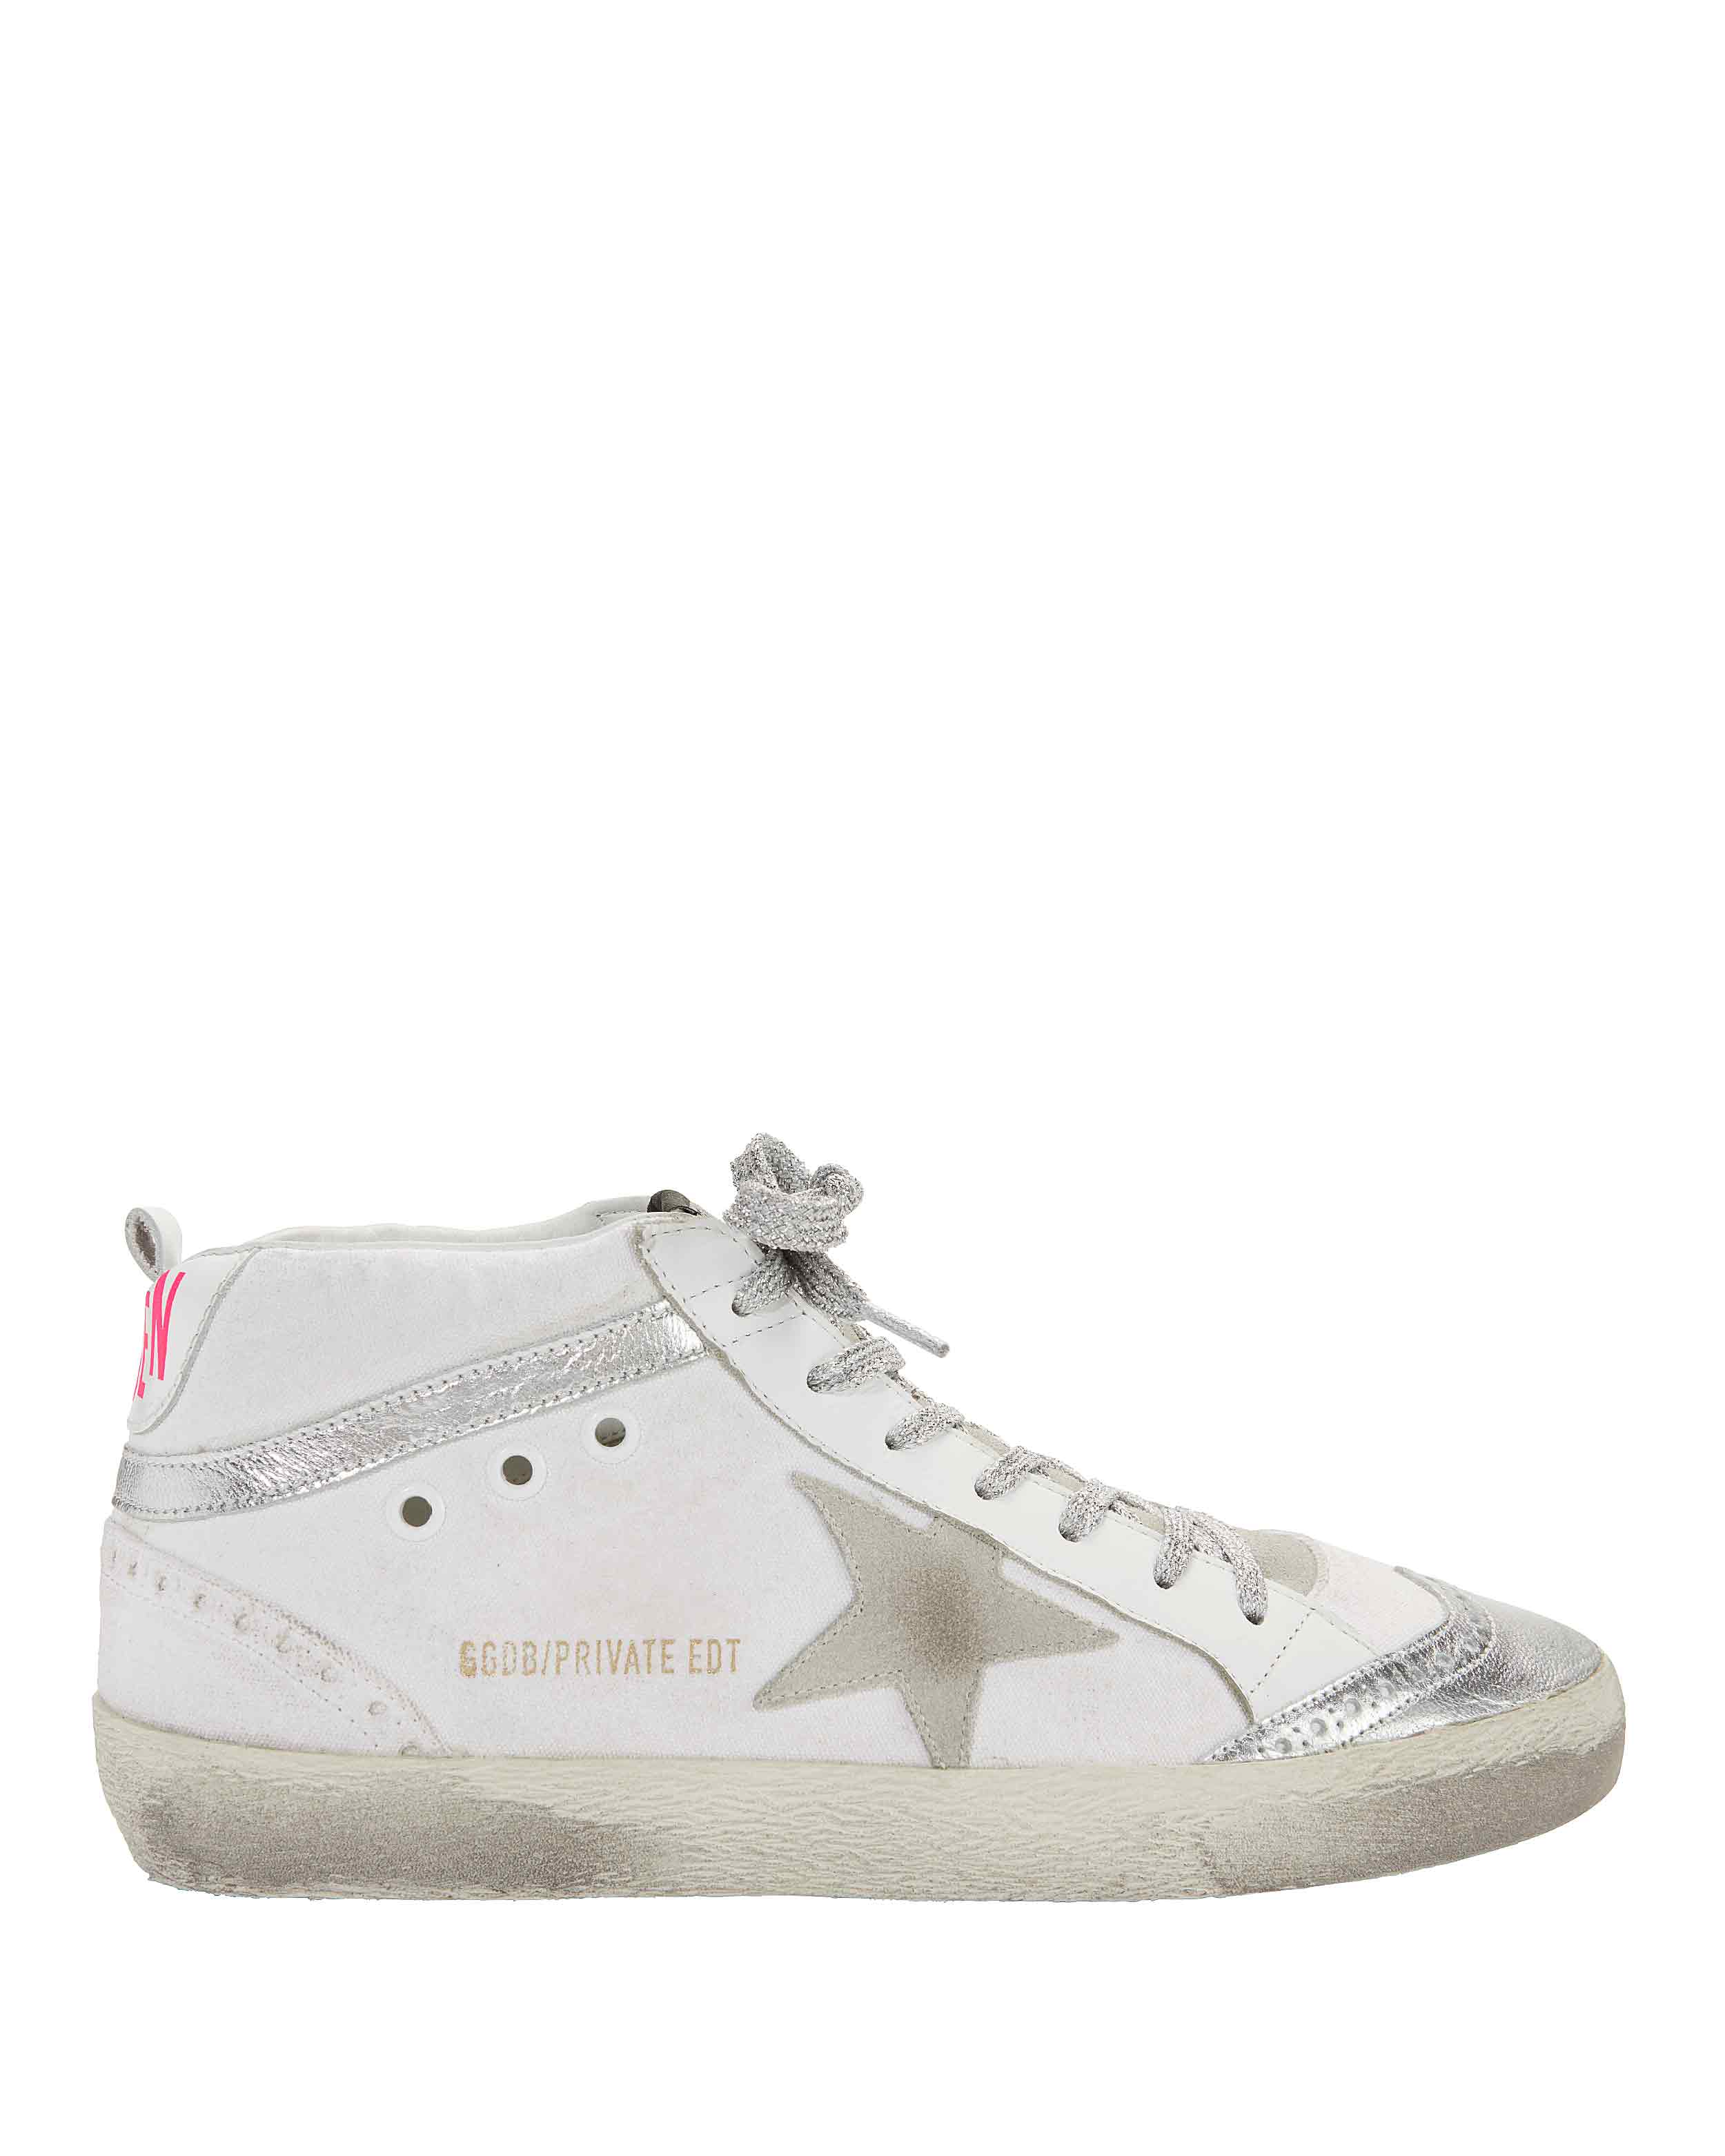 White Leather High Top Sneakers | Golden Goose